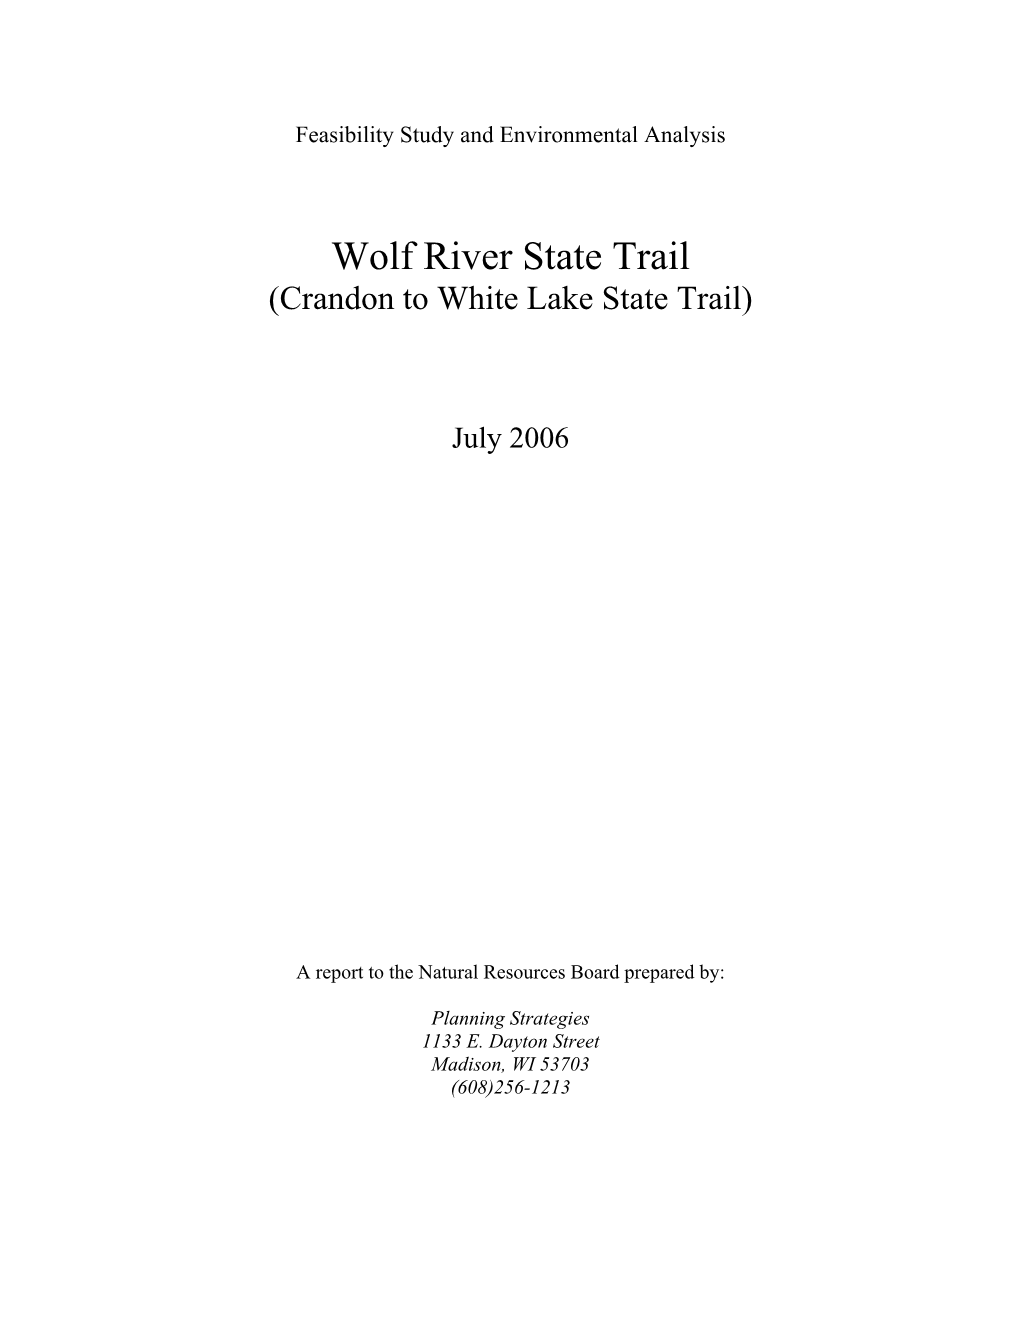 Wolf River State Trail Feasibility Study EA